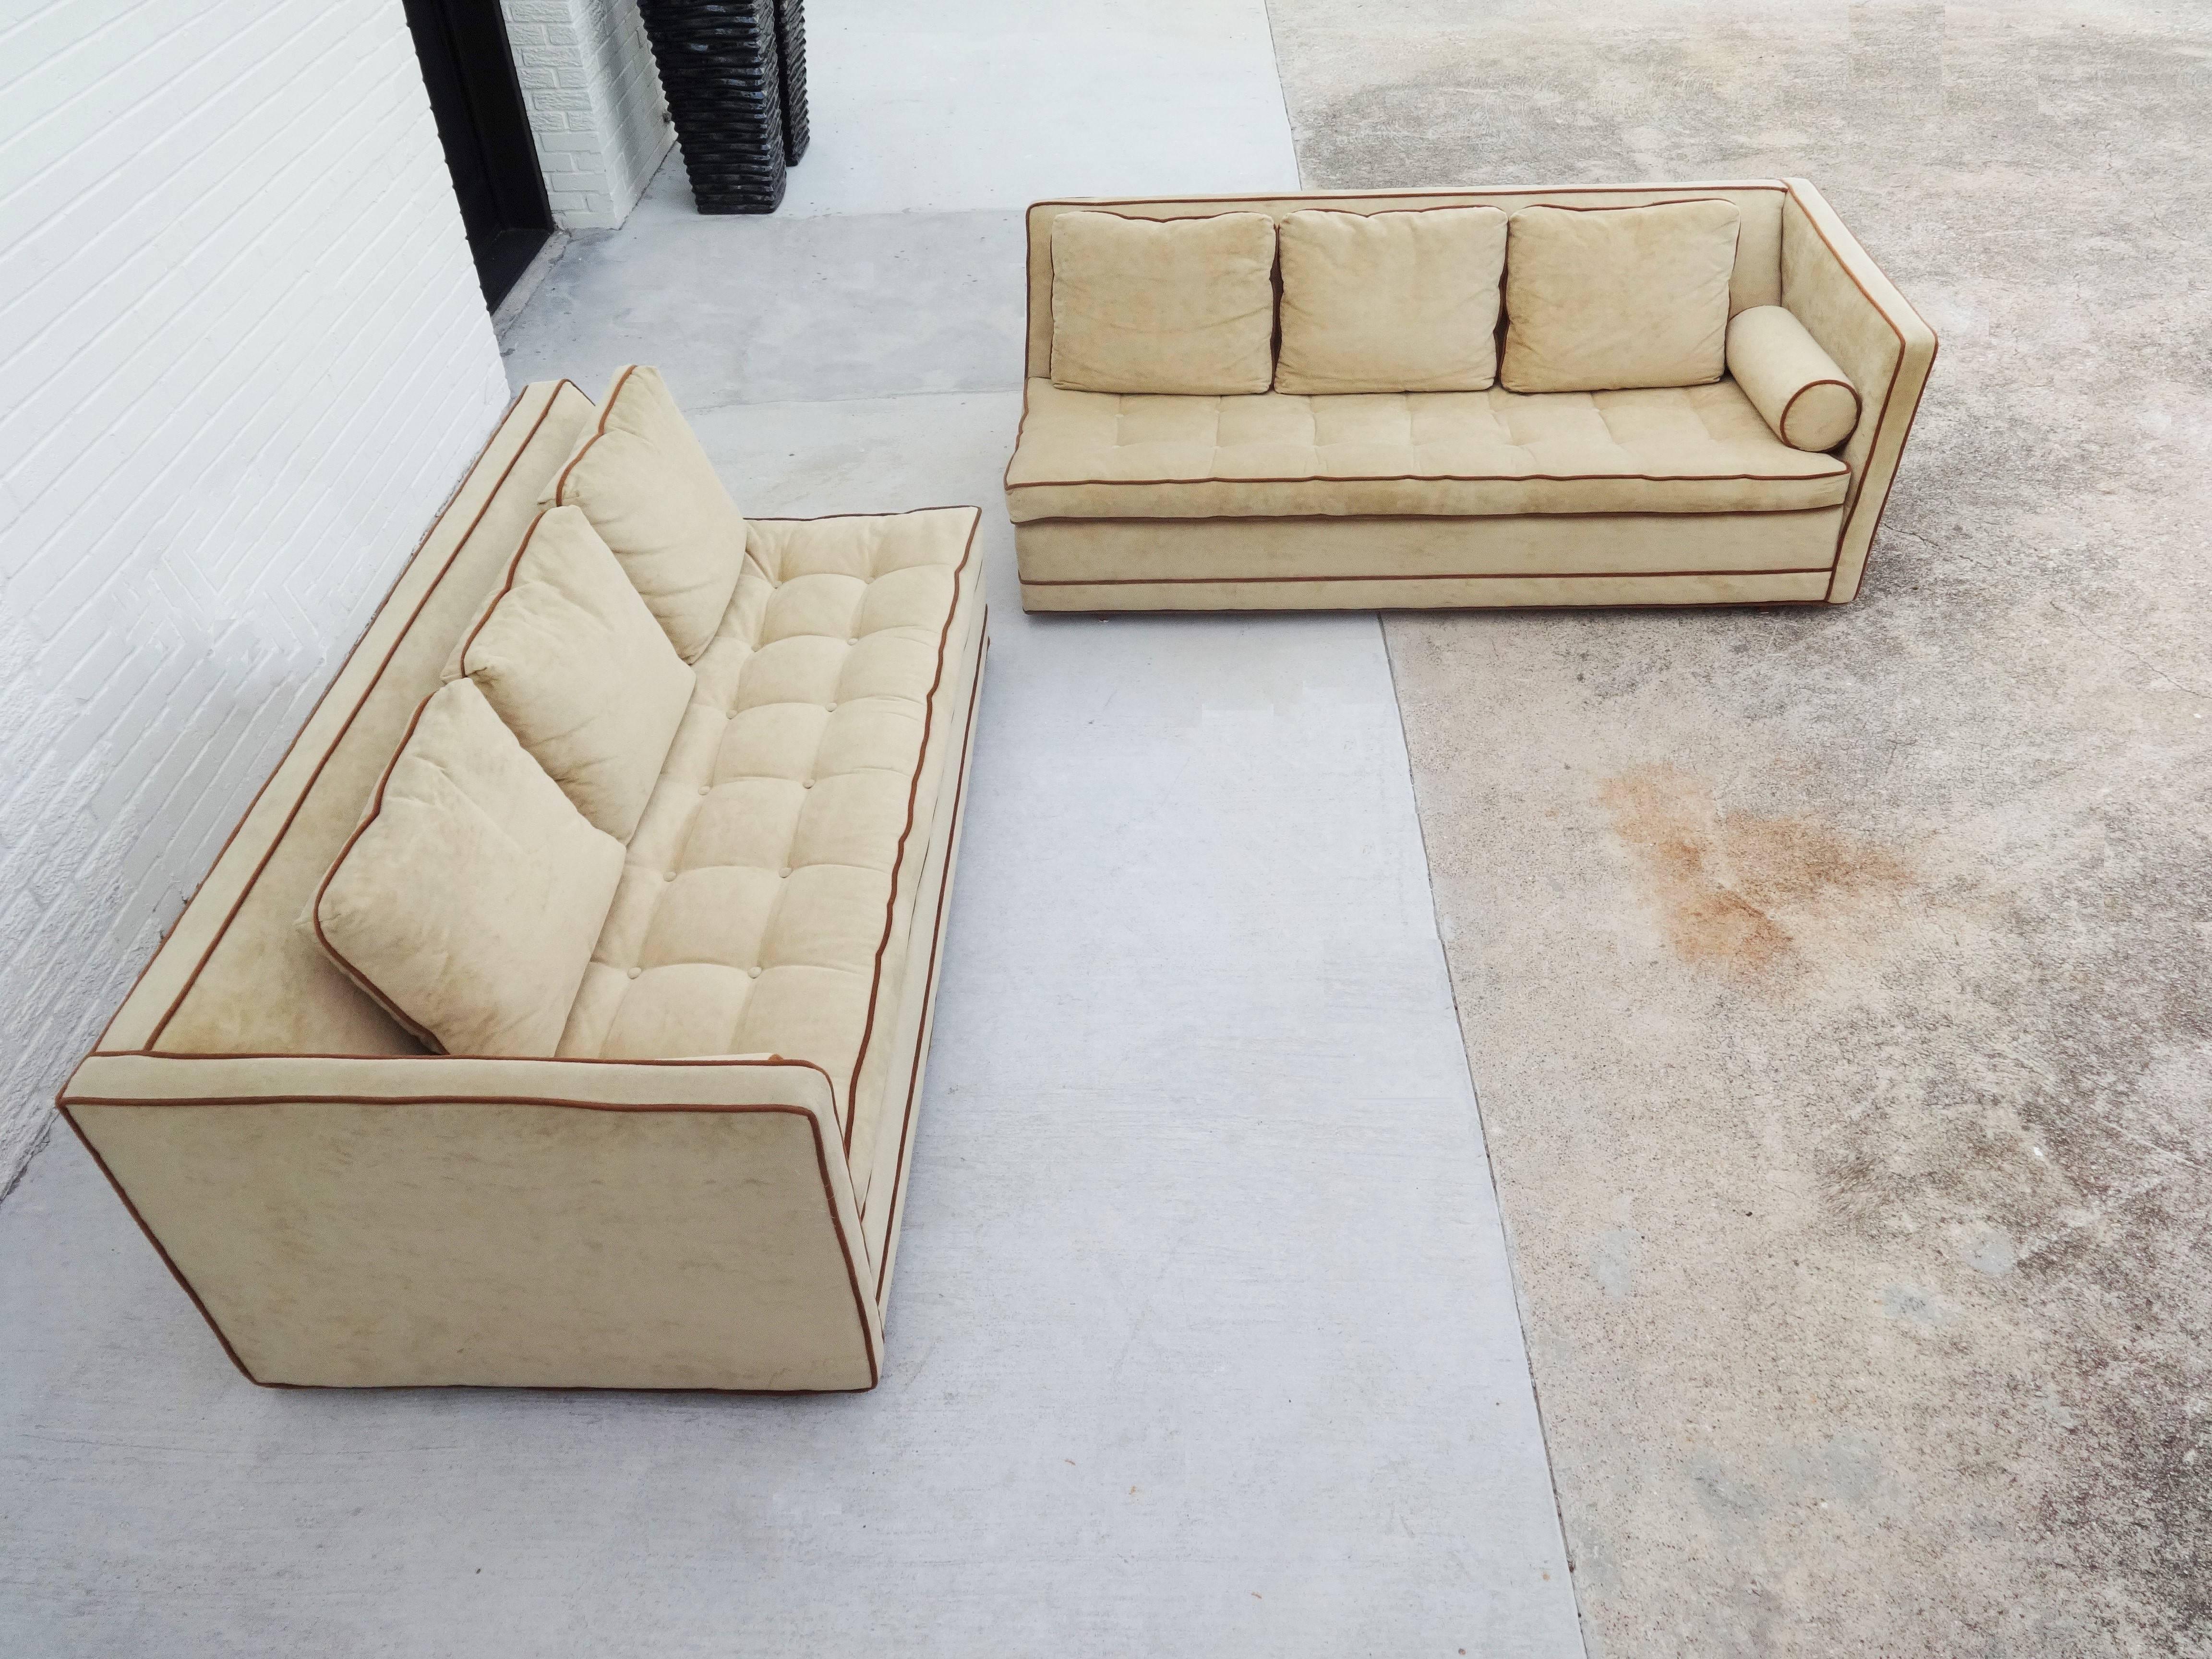 Stunning Two-Piece Harvey Probber Sectional Sofa In Good Condition For Sale In Dallas, TX